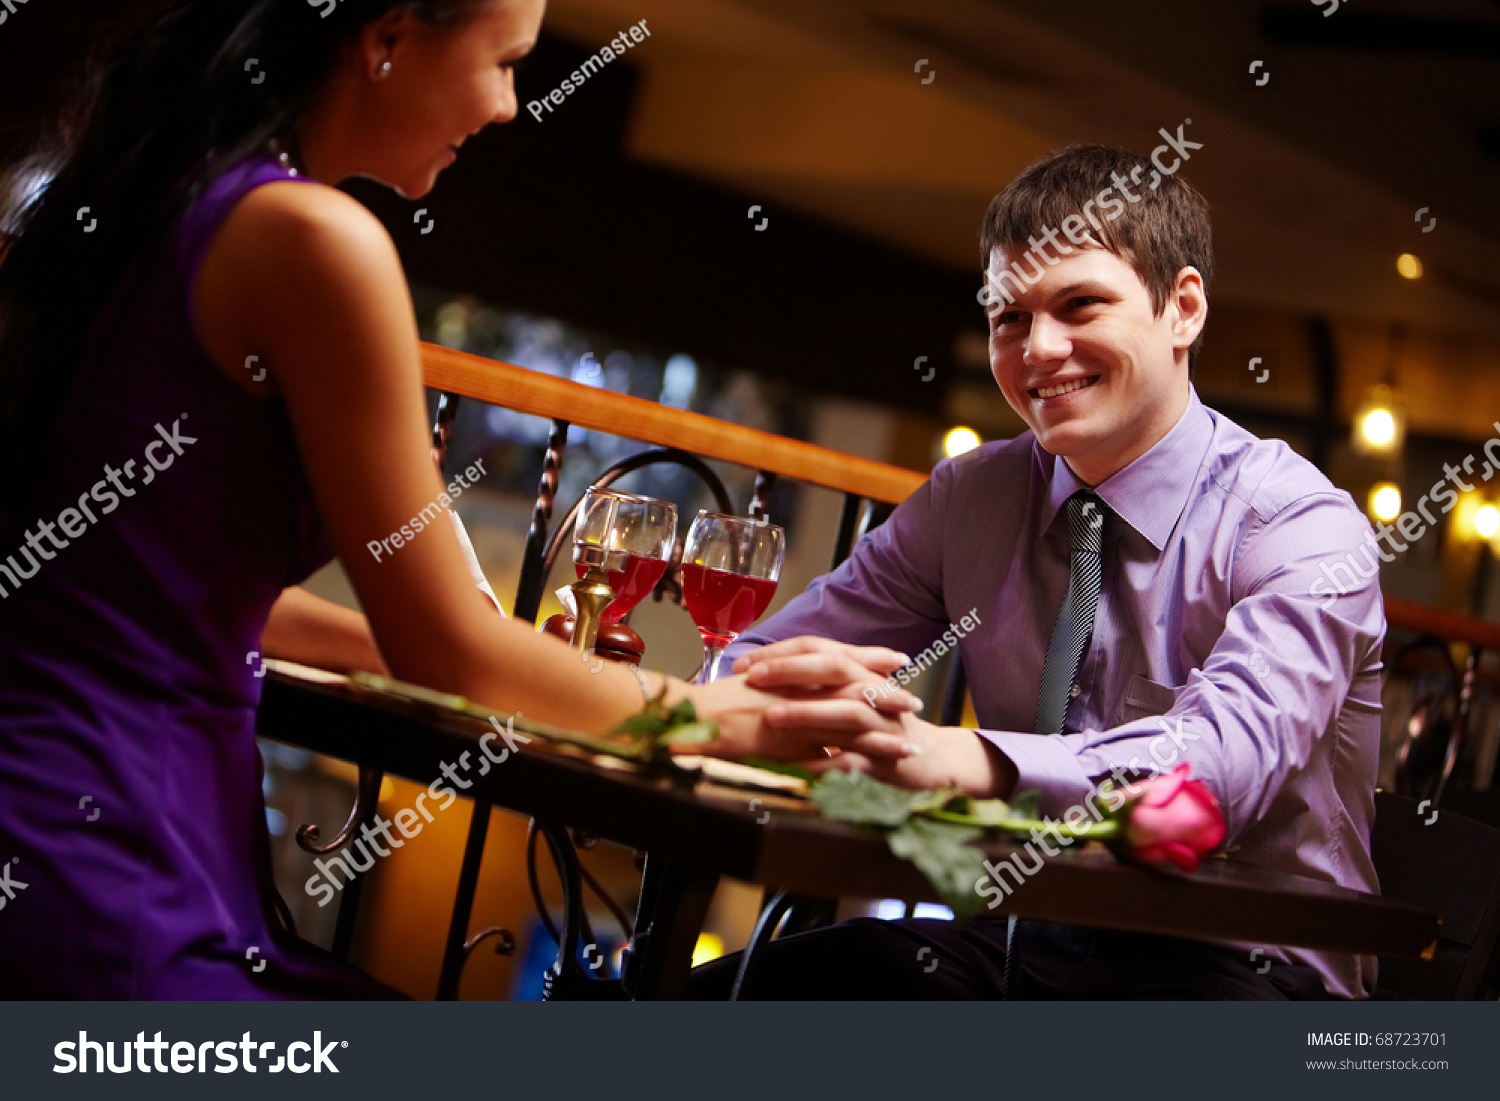 Portrait of amorous couple holding by hands in the cafe #68723701